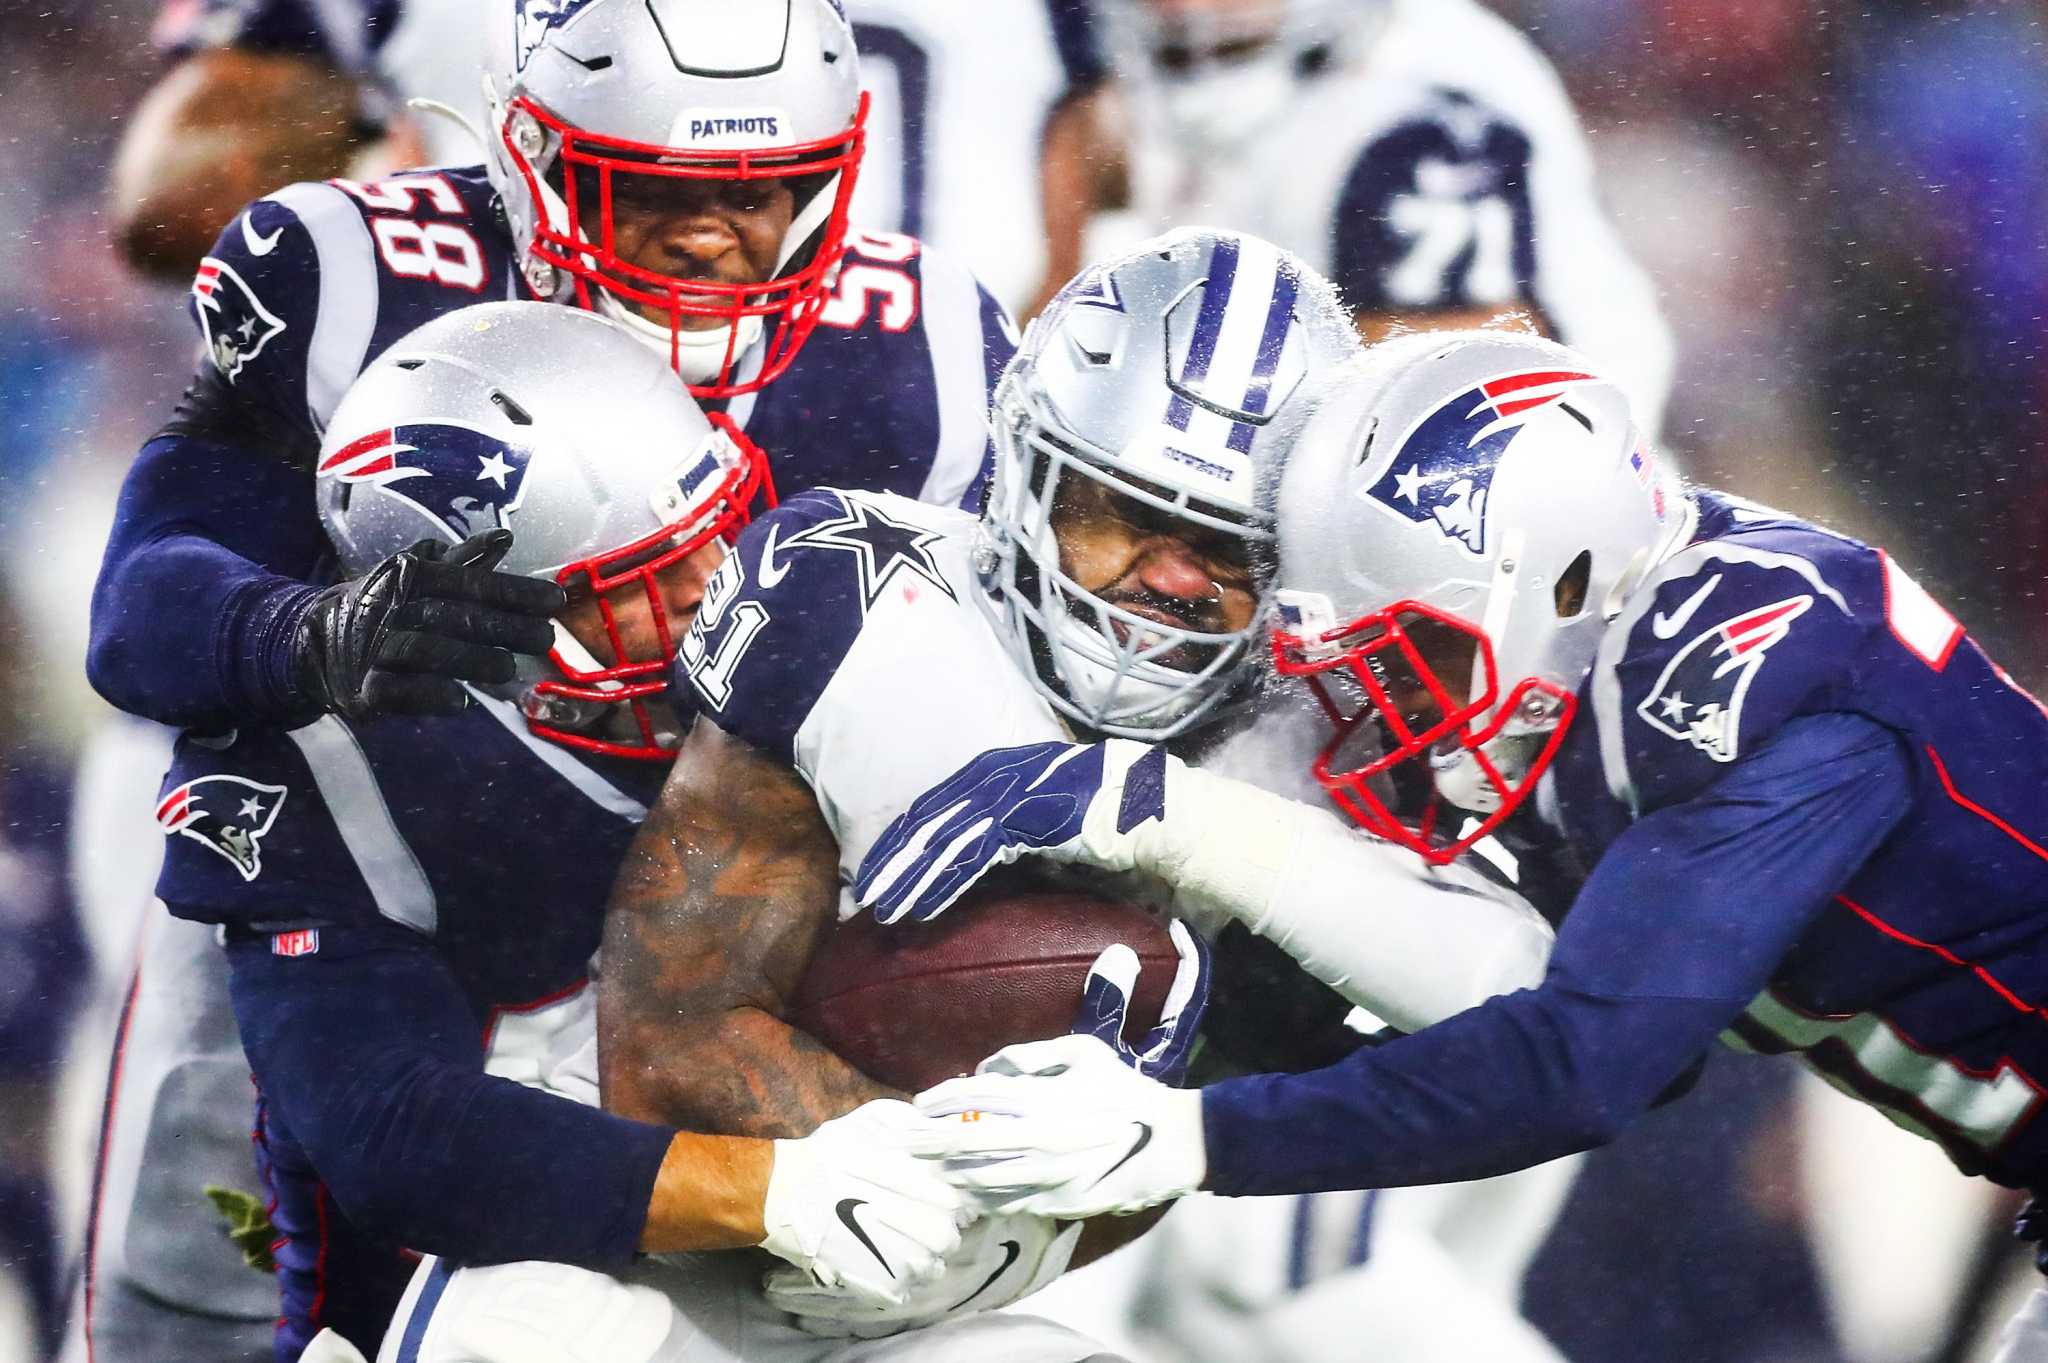 Patriots’ defense ranks among best this season, and alltime